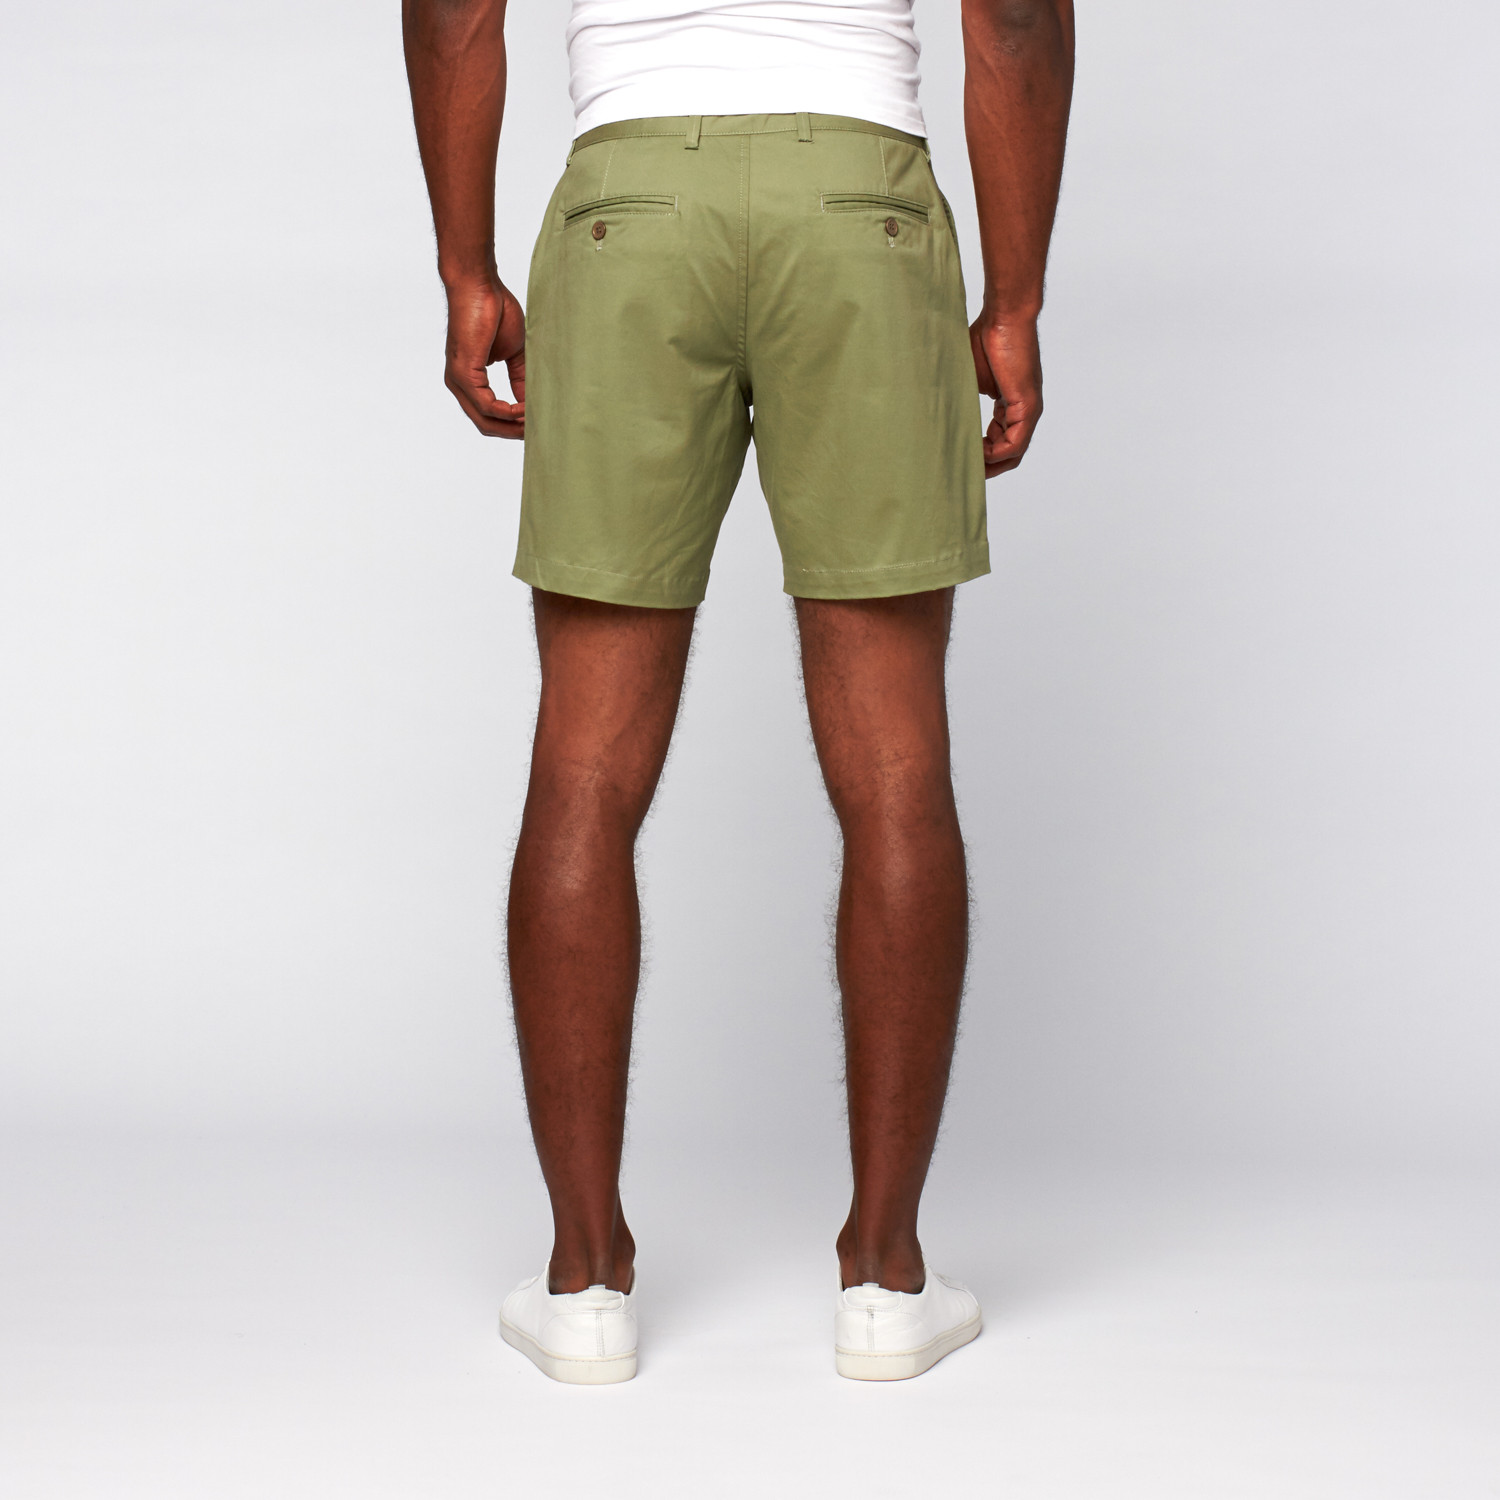 8" Inseam Twill Shorts // Miltary Green (29WX32L) - Postmarc - Touch of